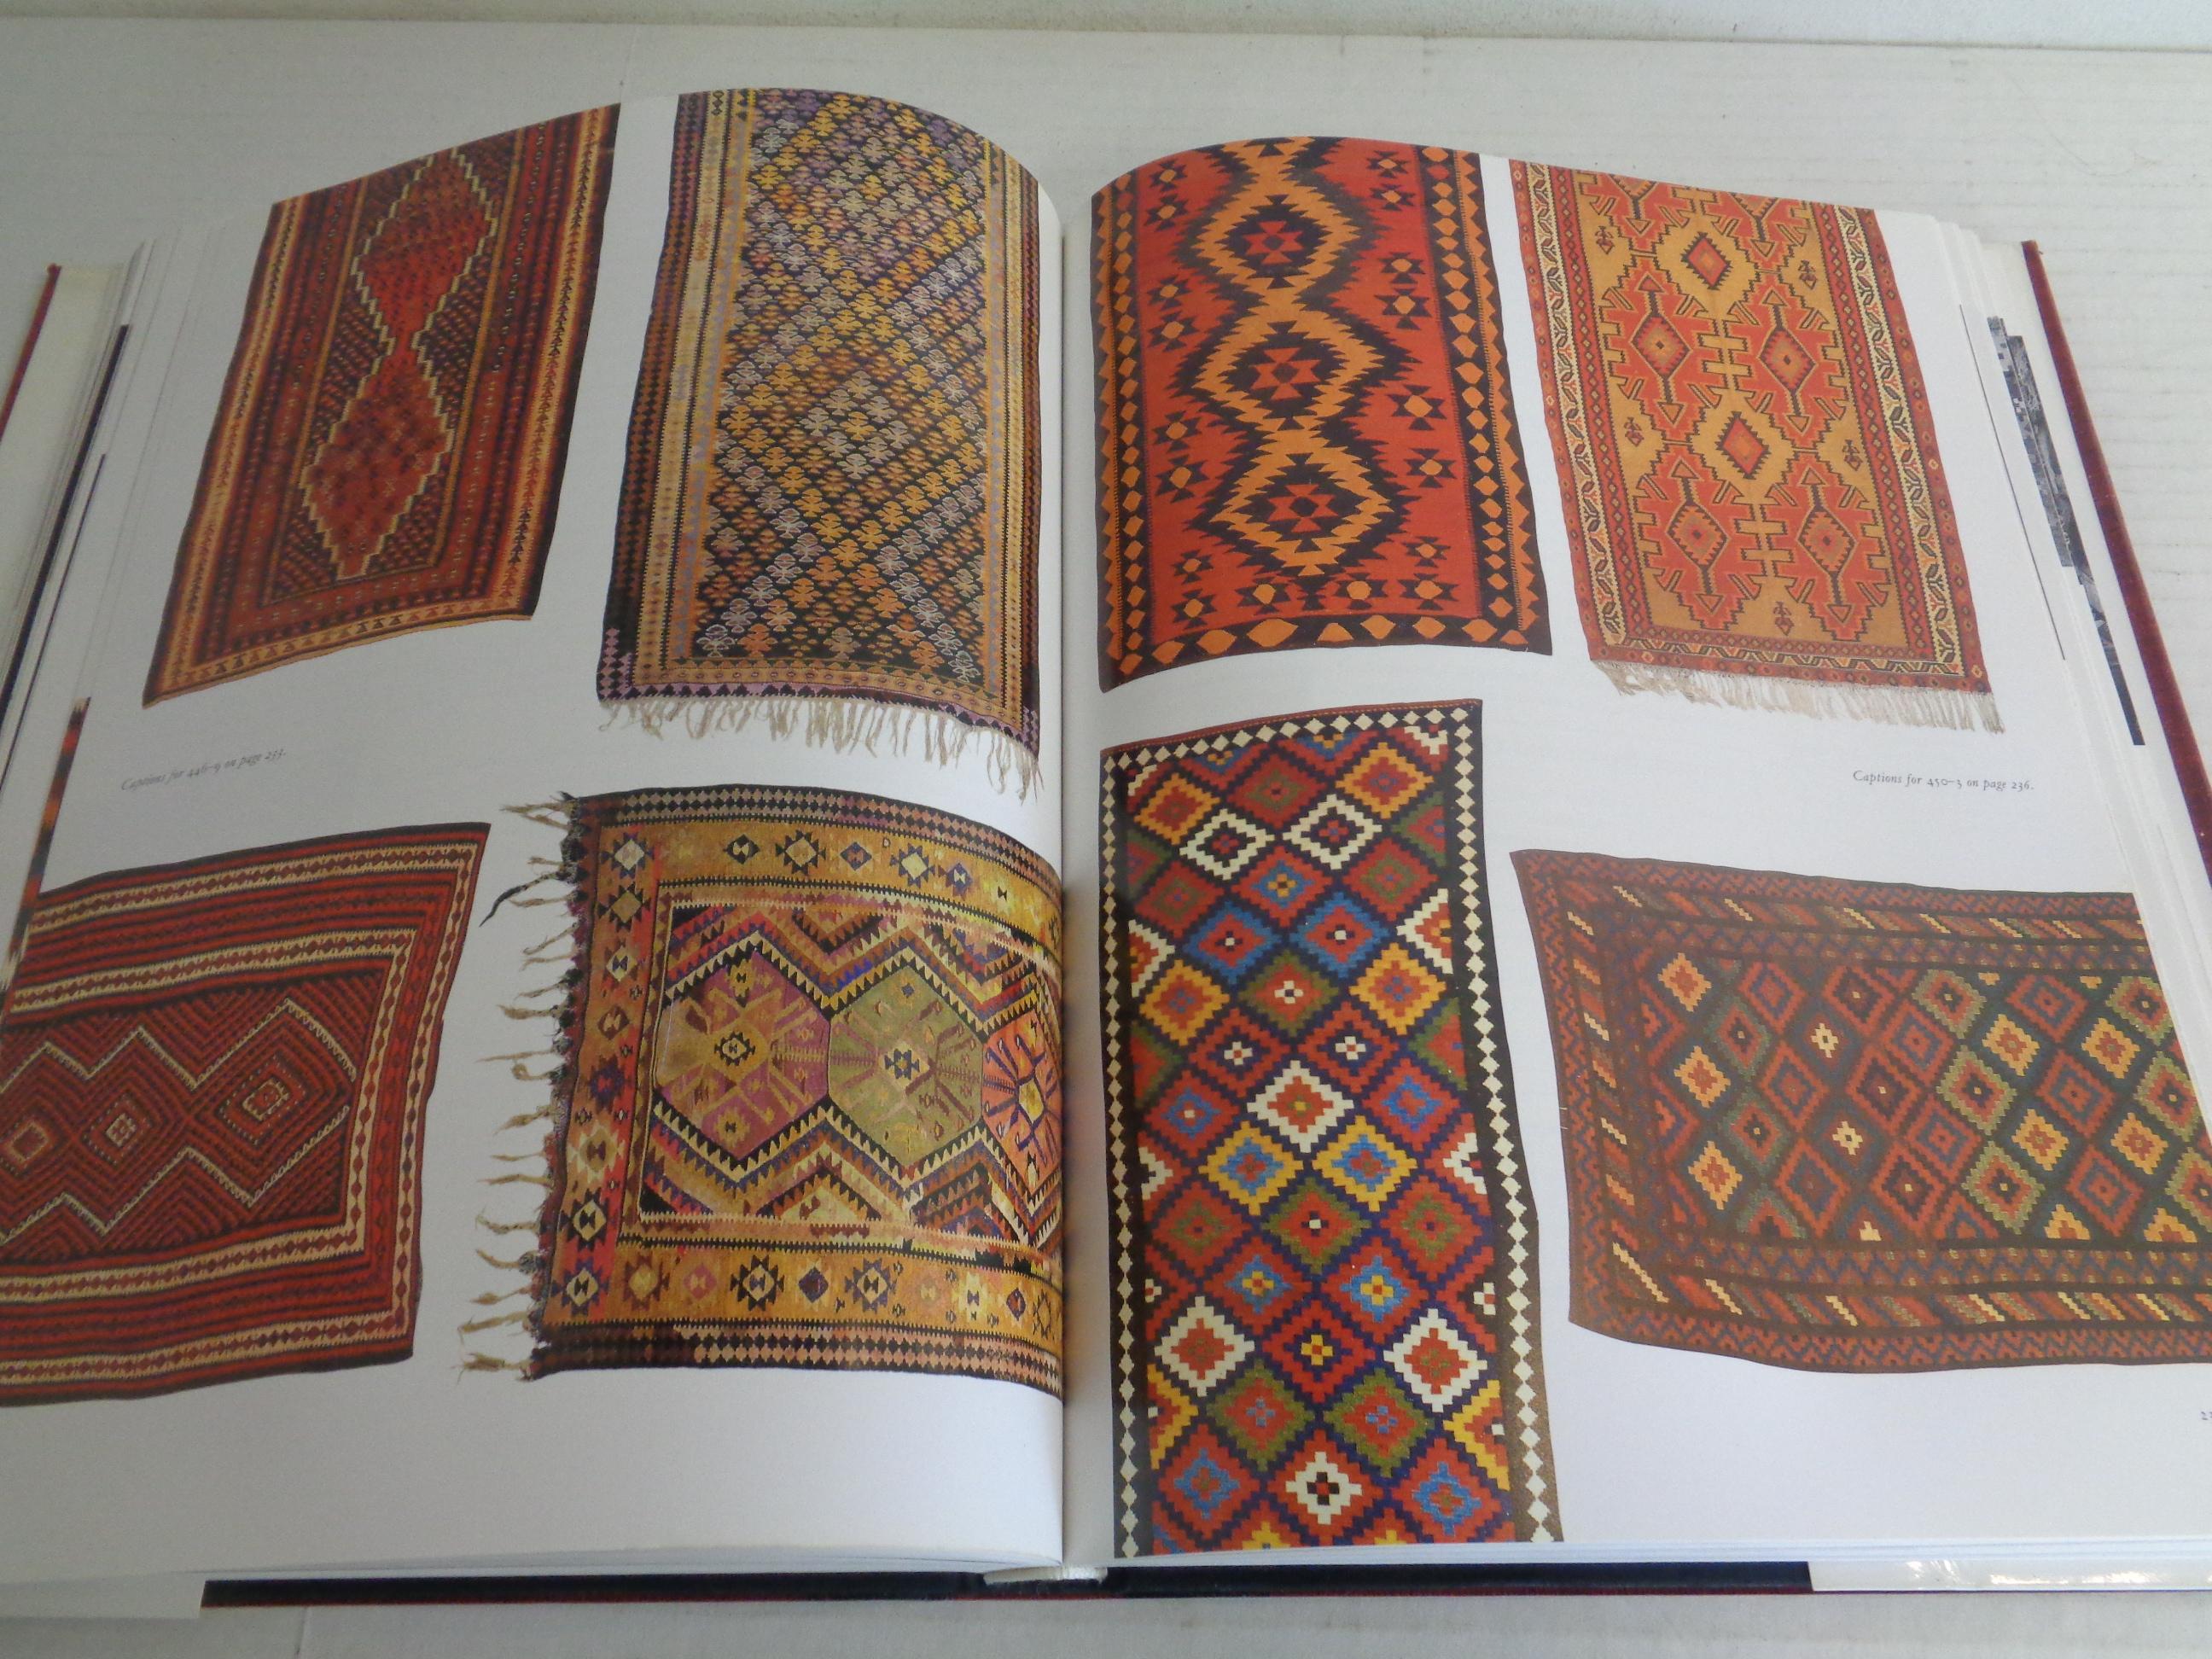 KILIM: The Complete Guide - 1993 Chronicle Books - 1st Edition For Sale 9